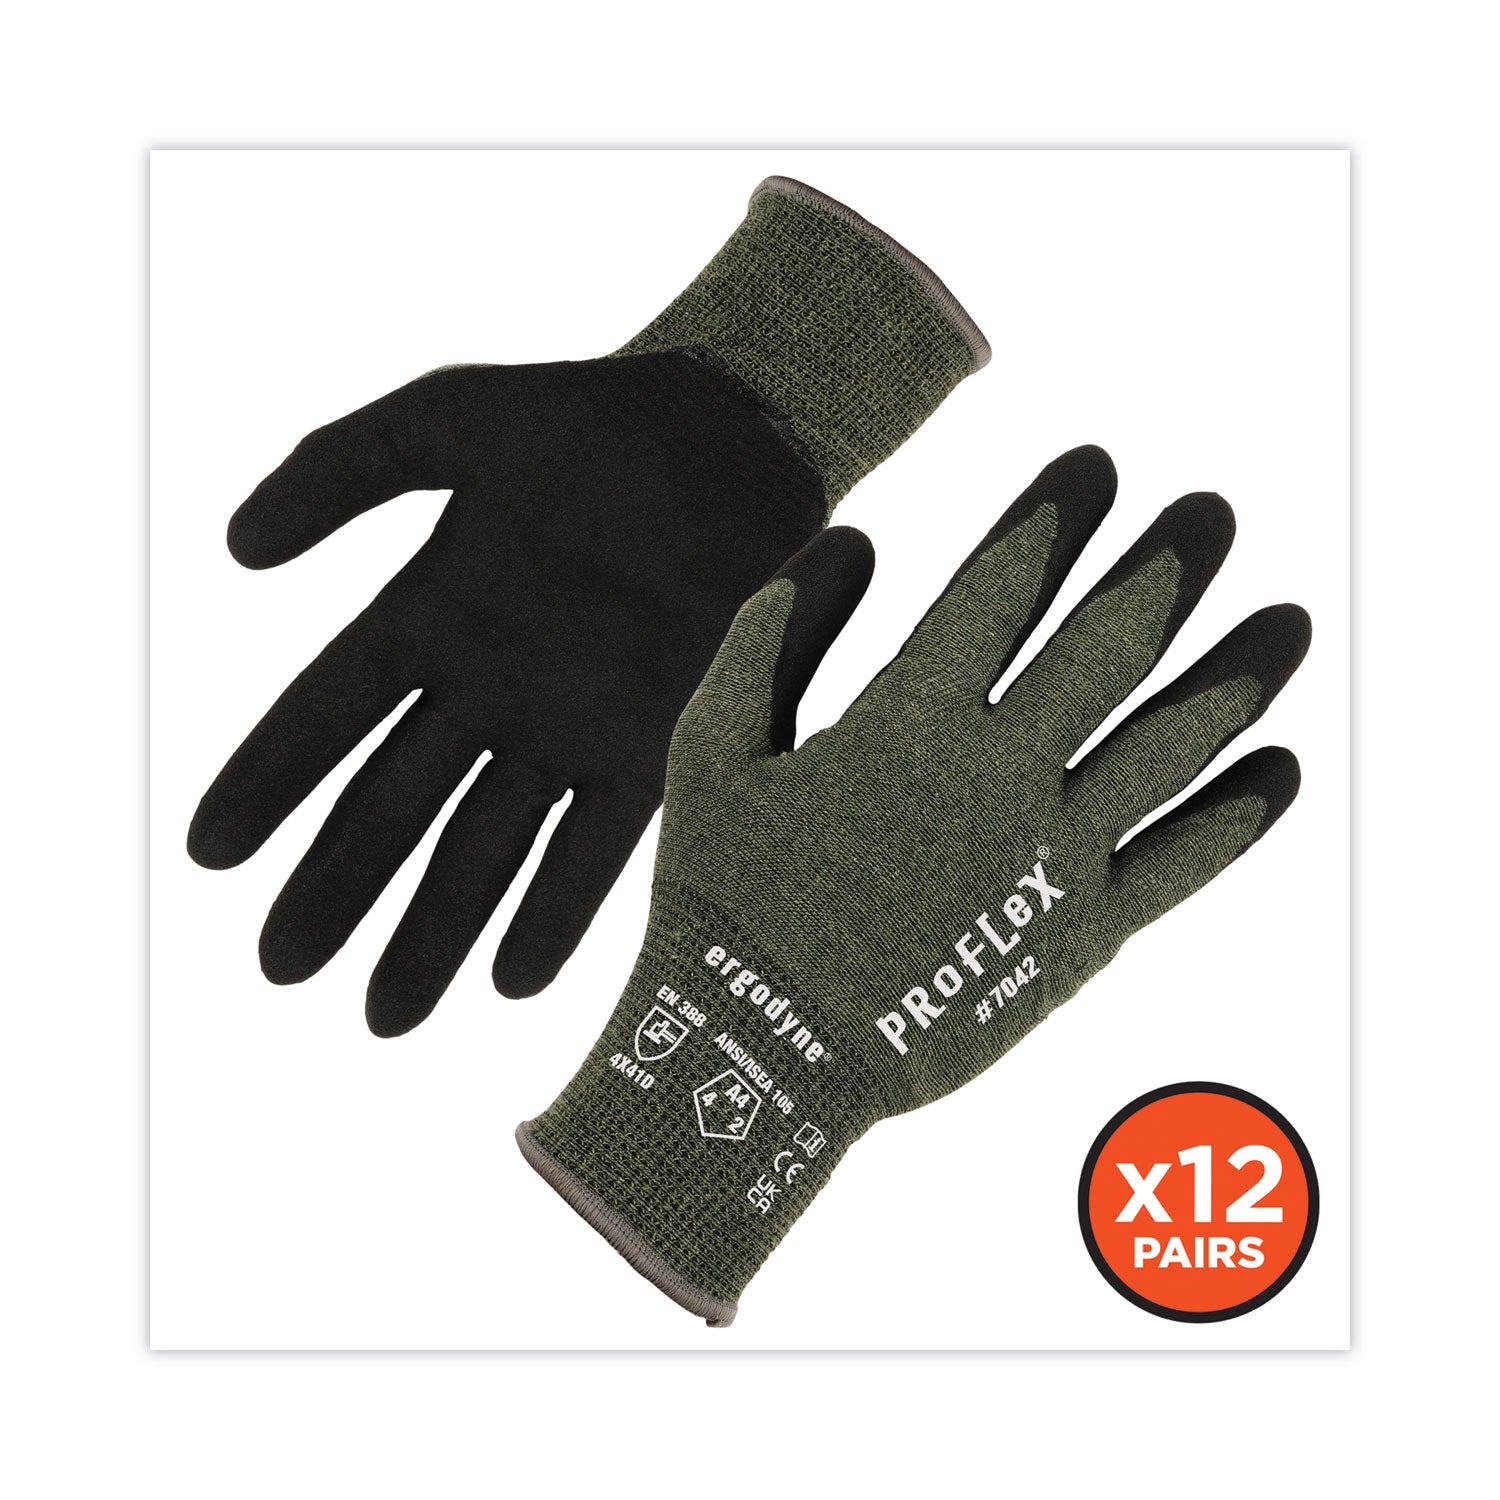 proflex-7042-ansi-a4-nitrile-coated-cr-gloves-green-small-12-pairs-pack-ships-in-1-3-business-days_ego10332 - 7